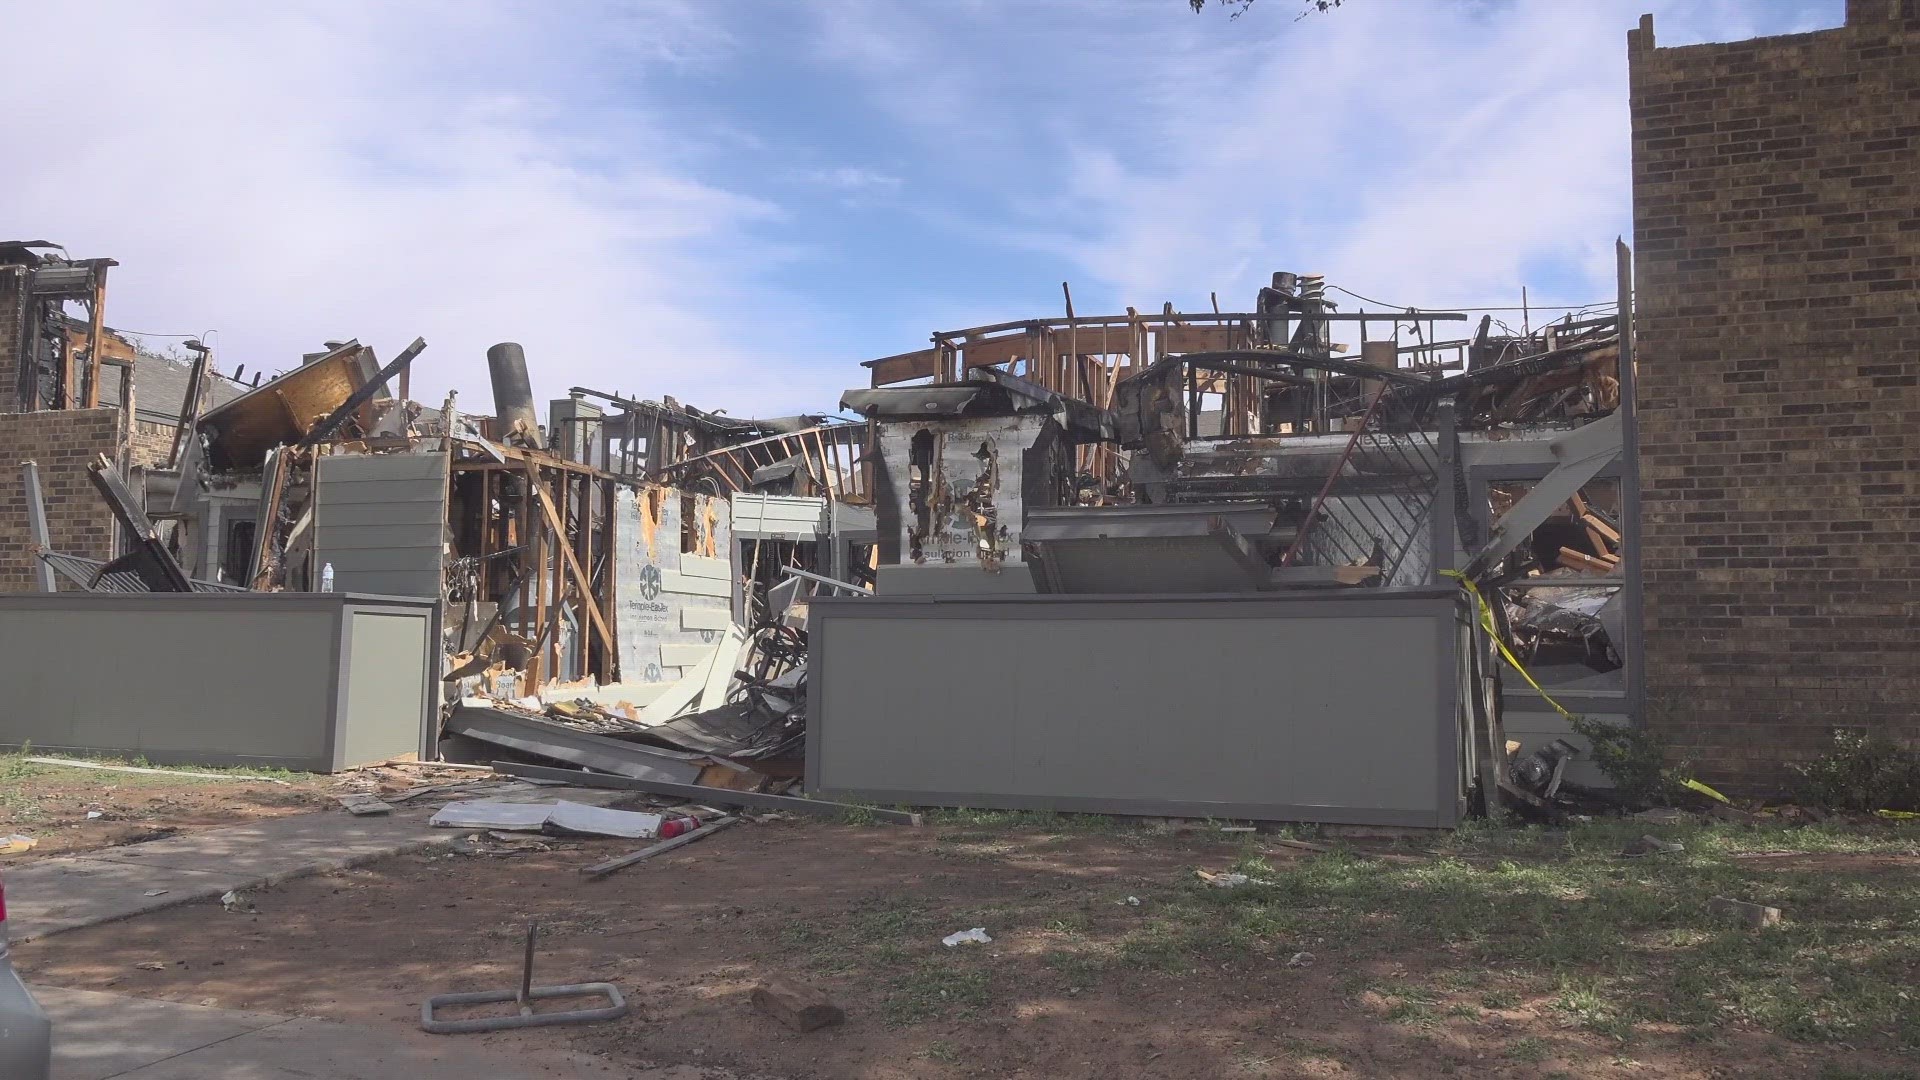 On March 3, a fire at a Midland apartment complex demolished an entire building. Now, it's left the people who lived there with only ashes in sight.